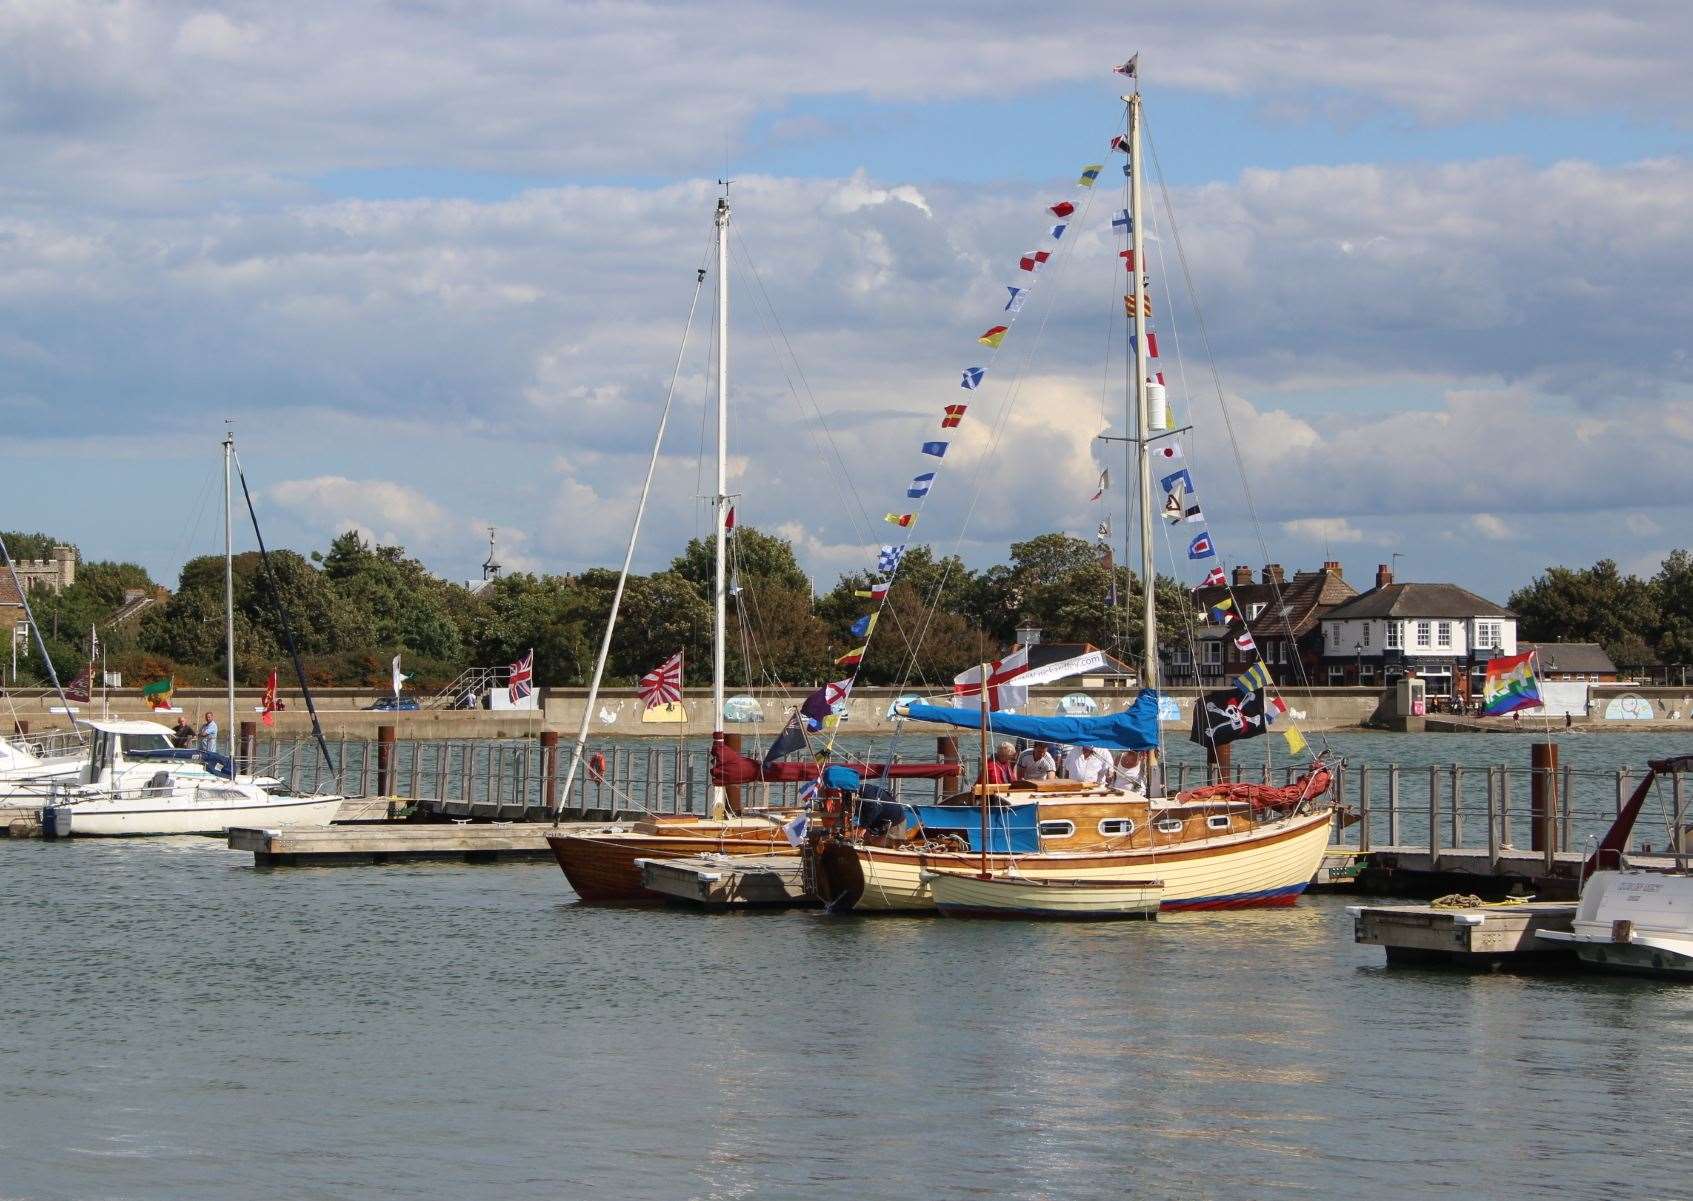 Classic Boat day at Queenborough